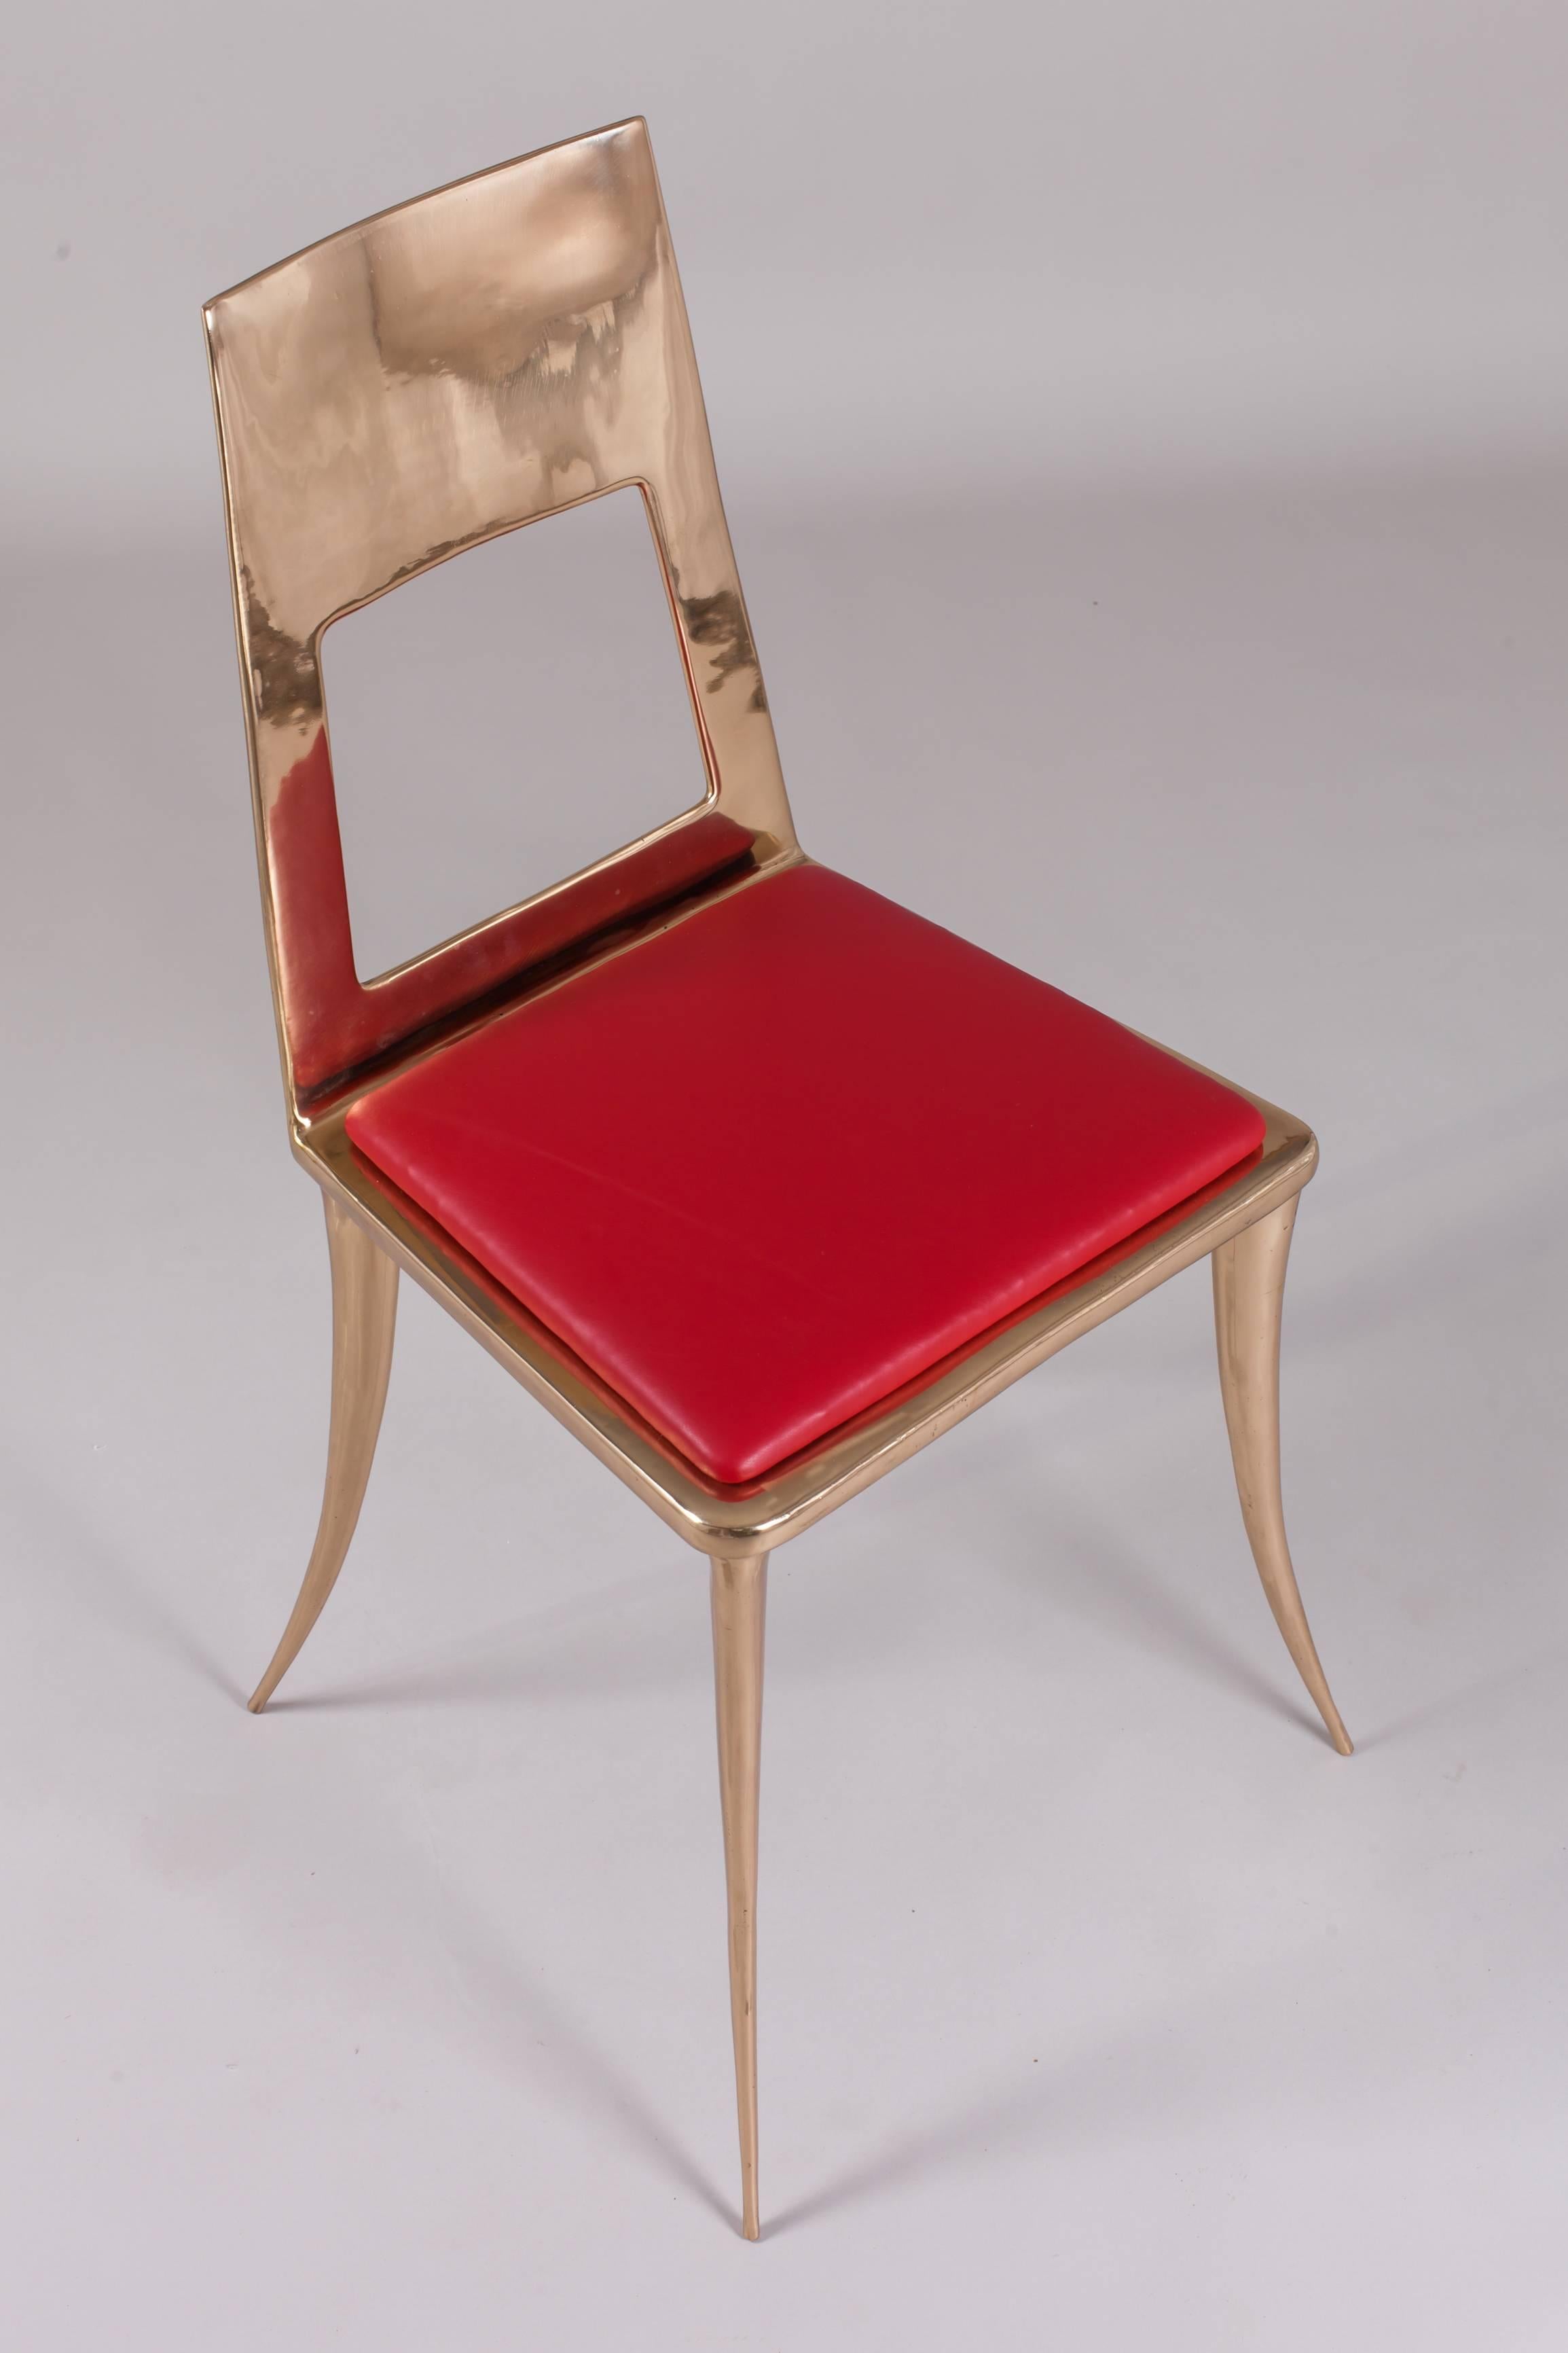 The Modern Klismos chair is hand-sculpted and cast in bronze using the time-honored method of lost-wax casting. After casting, the chair is painstaking sanded by hand to create a polished bronze finish. Nick Alan King is one of few living American